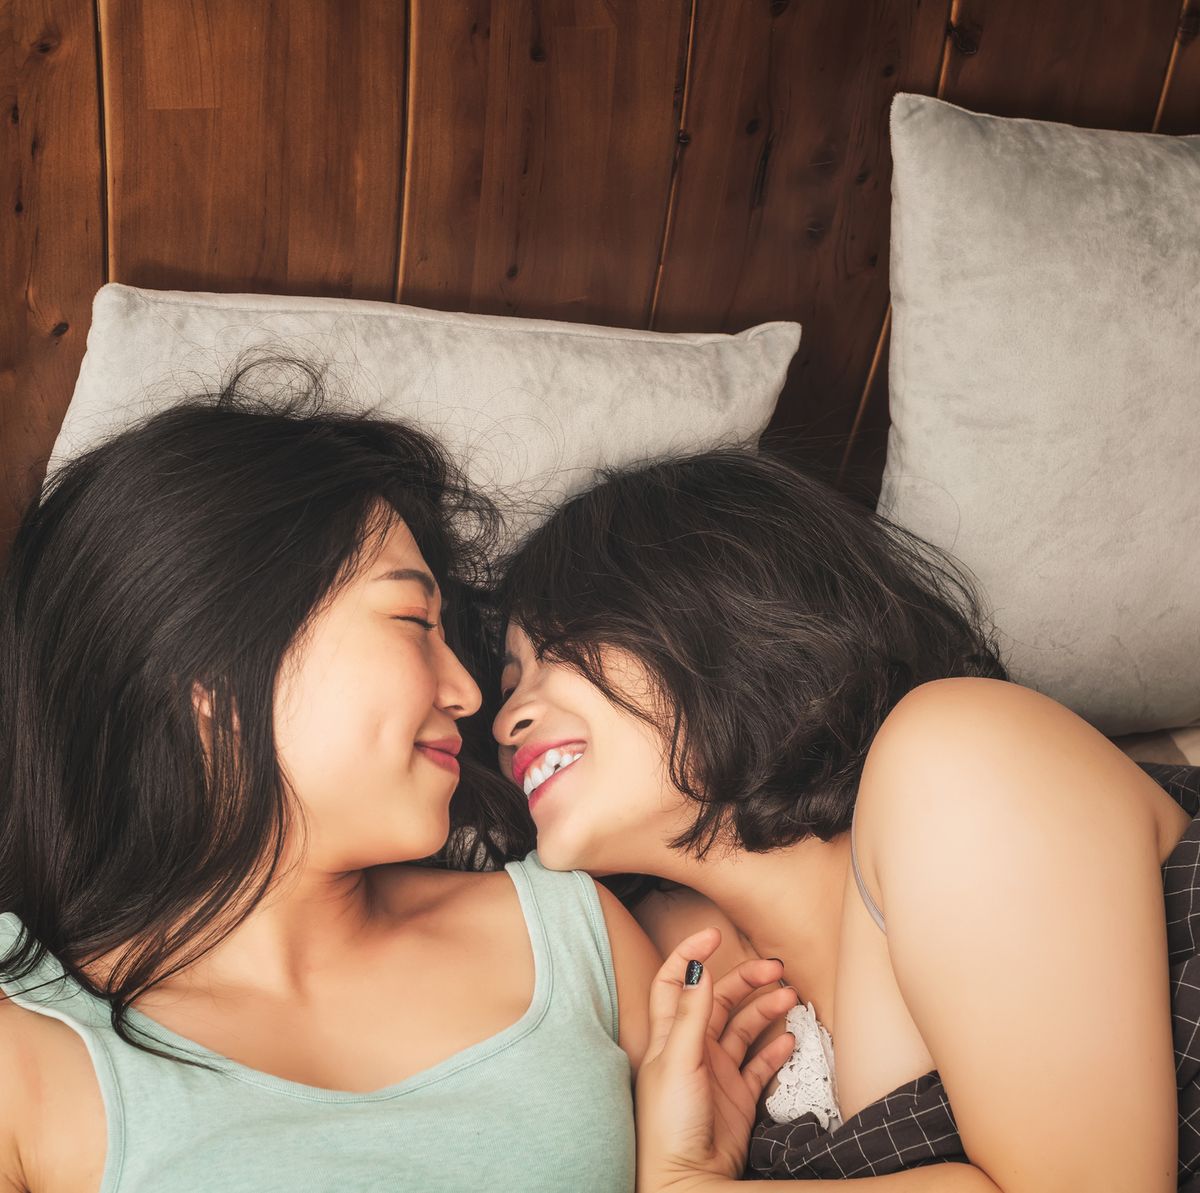 Bed Sharing Turn Into Fuck Video - Am I A Lesbian?' - 15 People Share How They Knew Their Sexuality